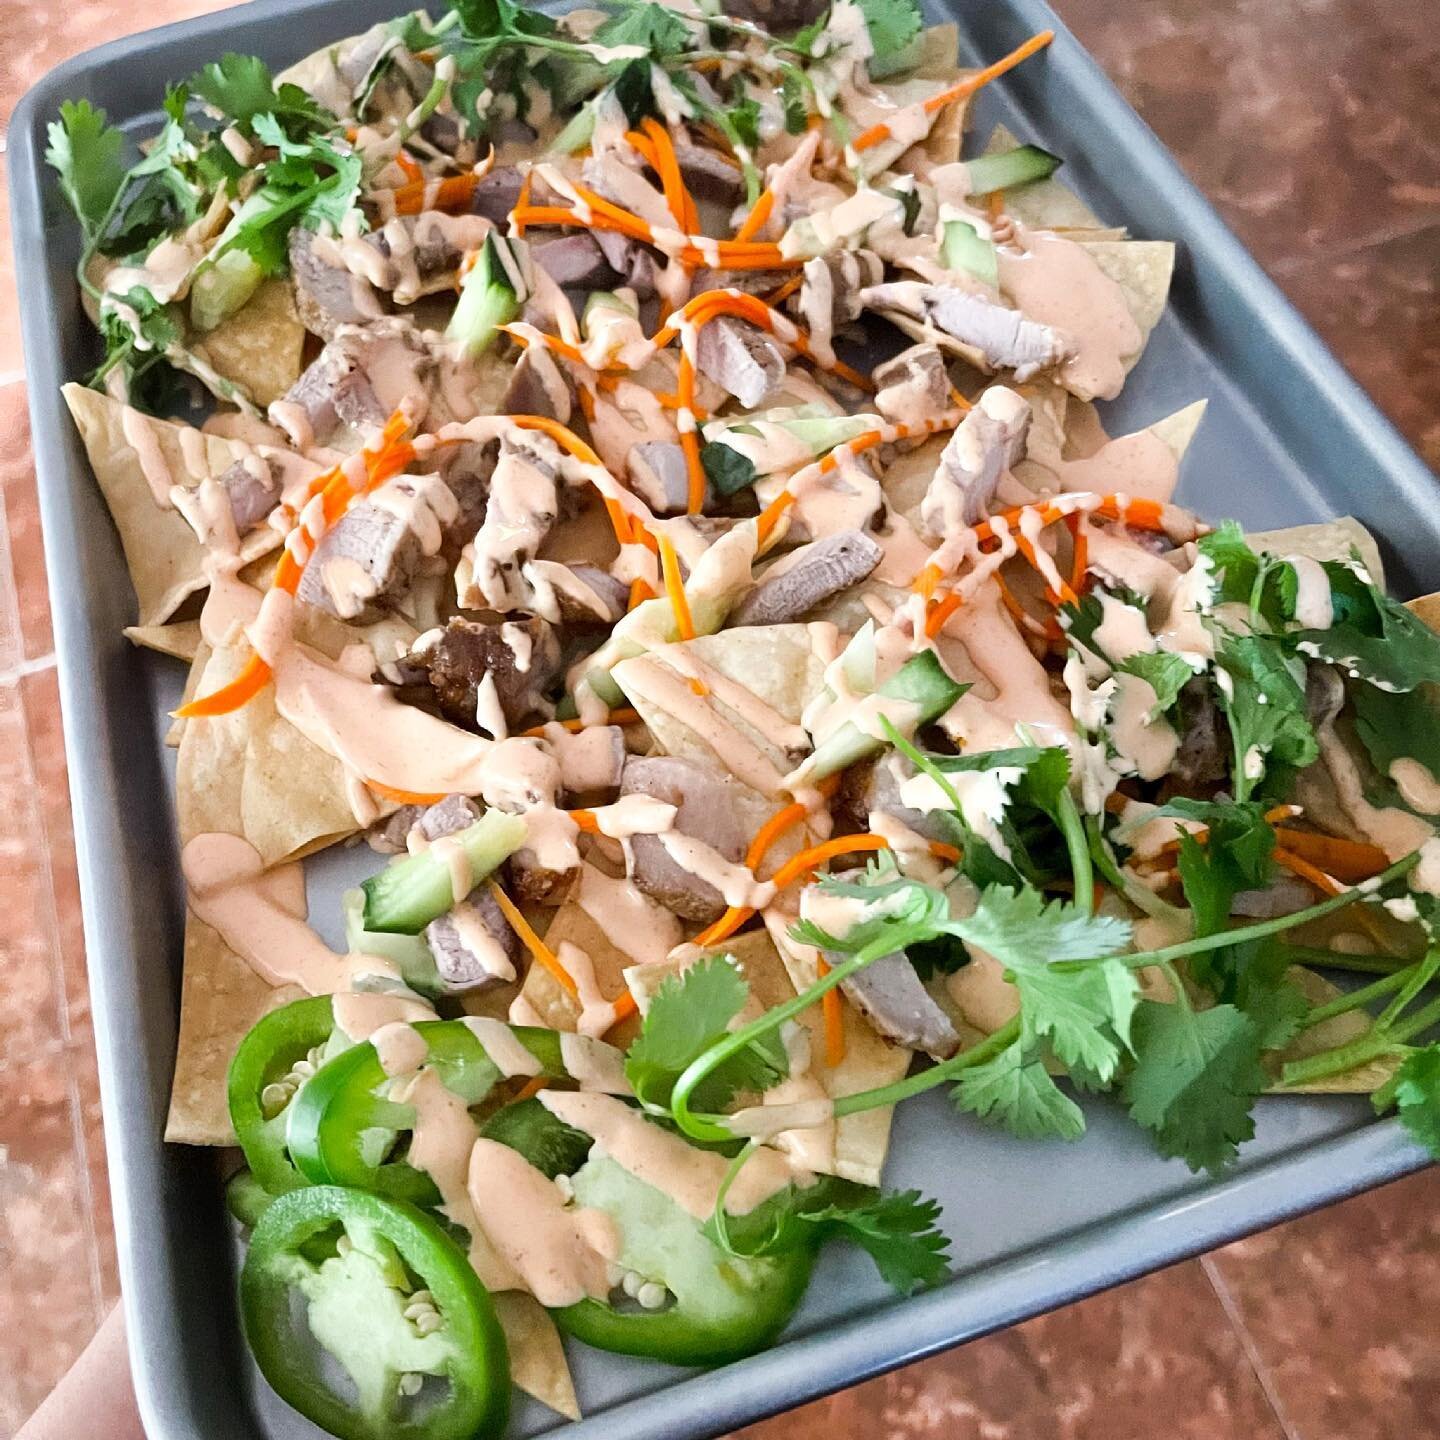 BANH MI NACHOS
I was craving banh mi and craving some chips so let&rsquo;s combine em together! 
I grilled up the pork using the easy marinade recipe found in my cookbook for banh mi and added all the fixings: 
&bull;sliced cucumbers 
&bull;carrots /